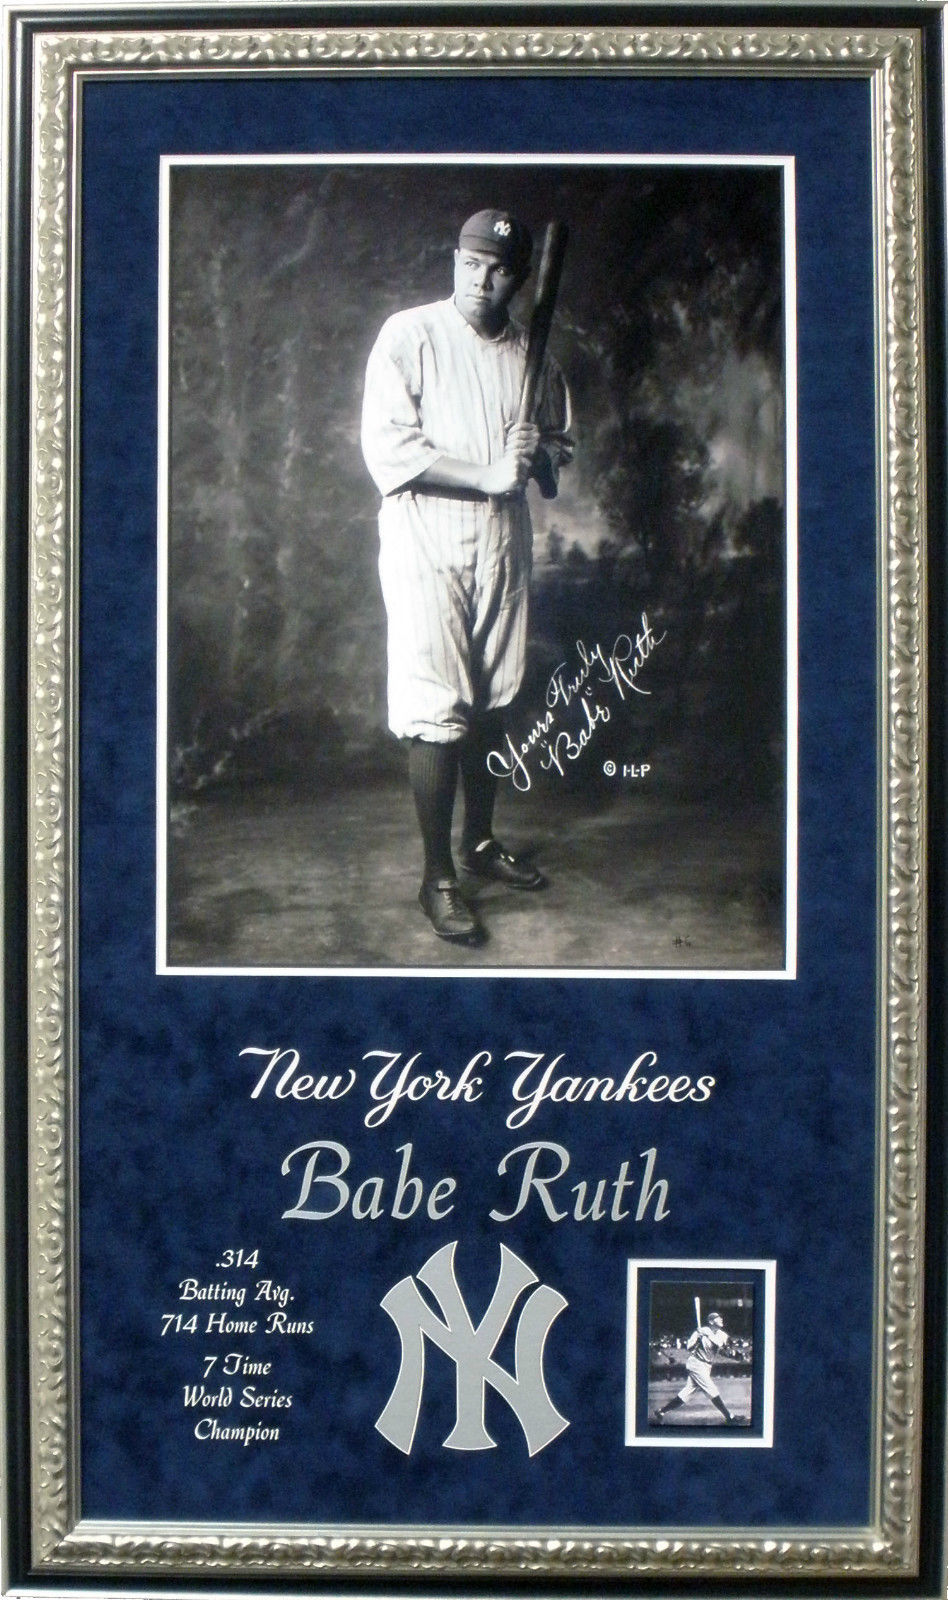 Babe Ruth New York Yankee 16x20 Photo Deluxe Framed 24x40 Must See Brand New Game Day Icons 